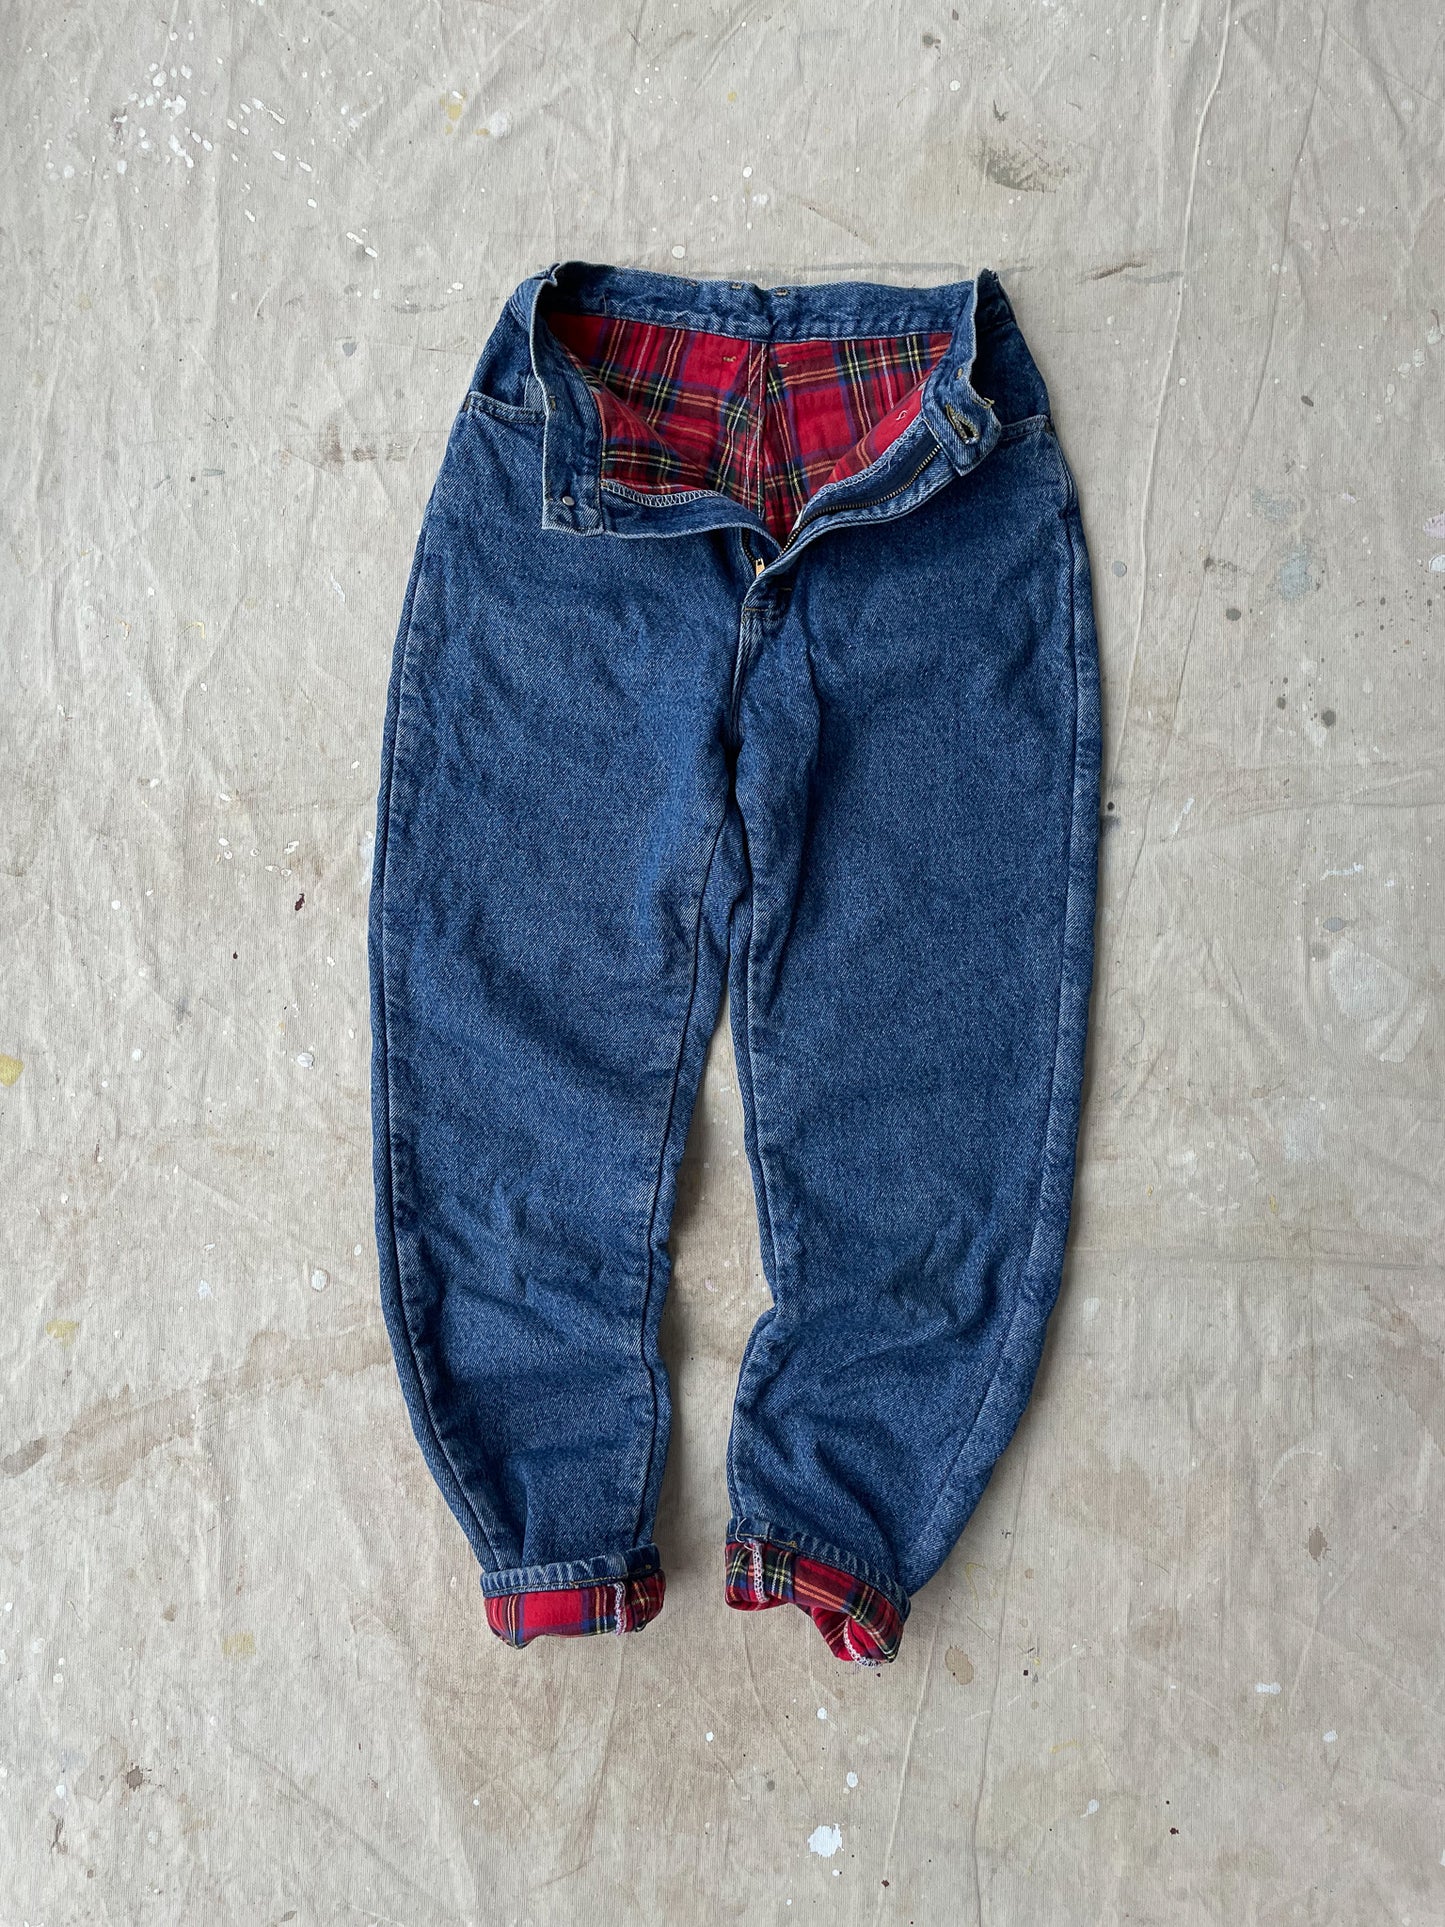 L.L. Bean Flannel Lined High-Rise Jeans—[24X28]